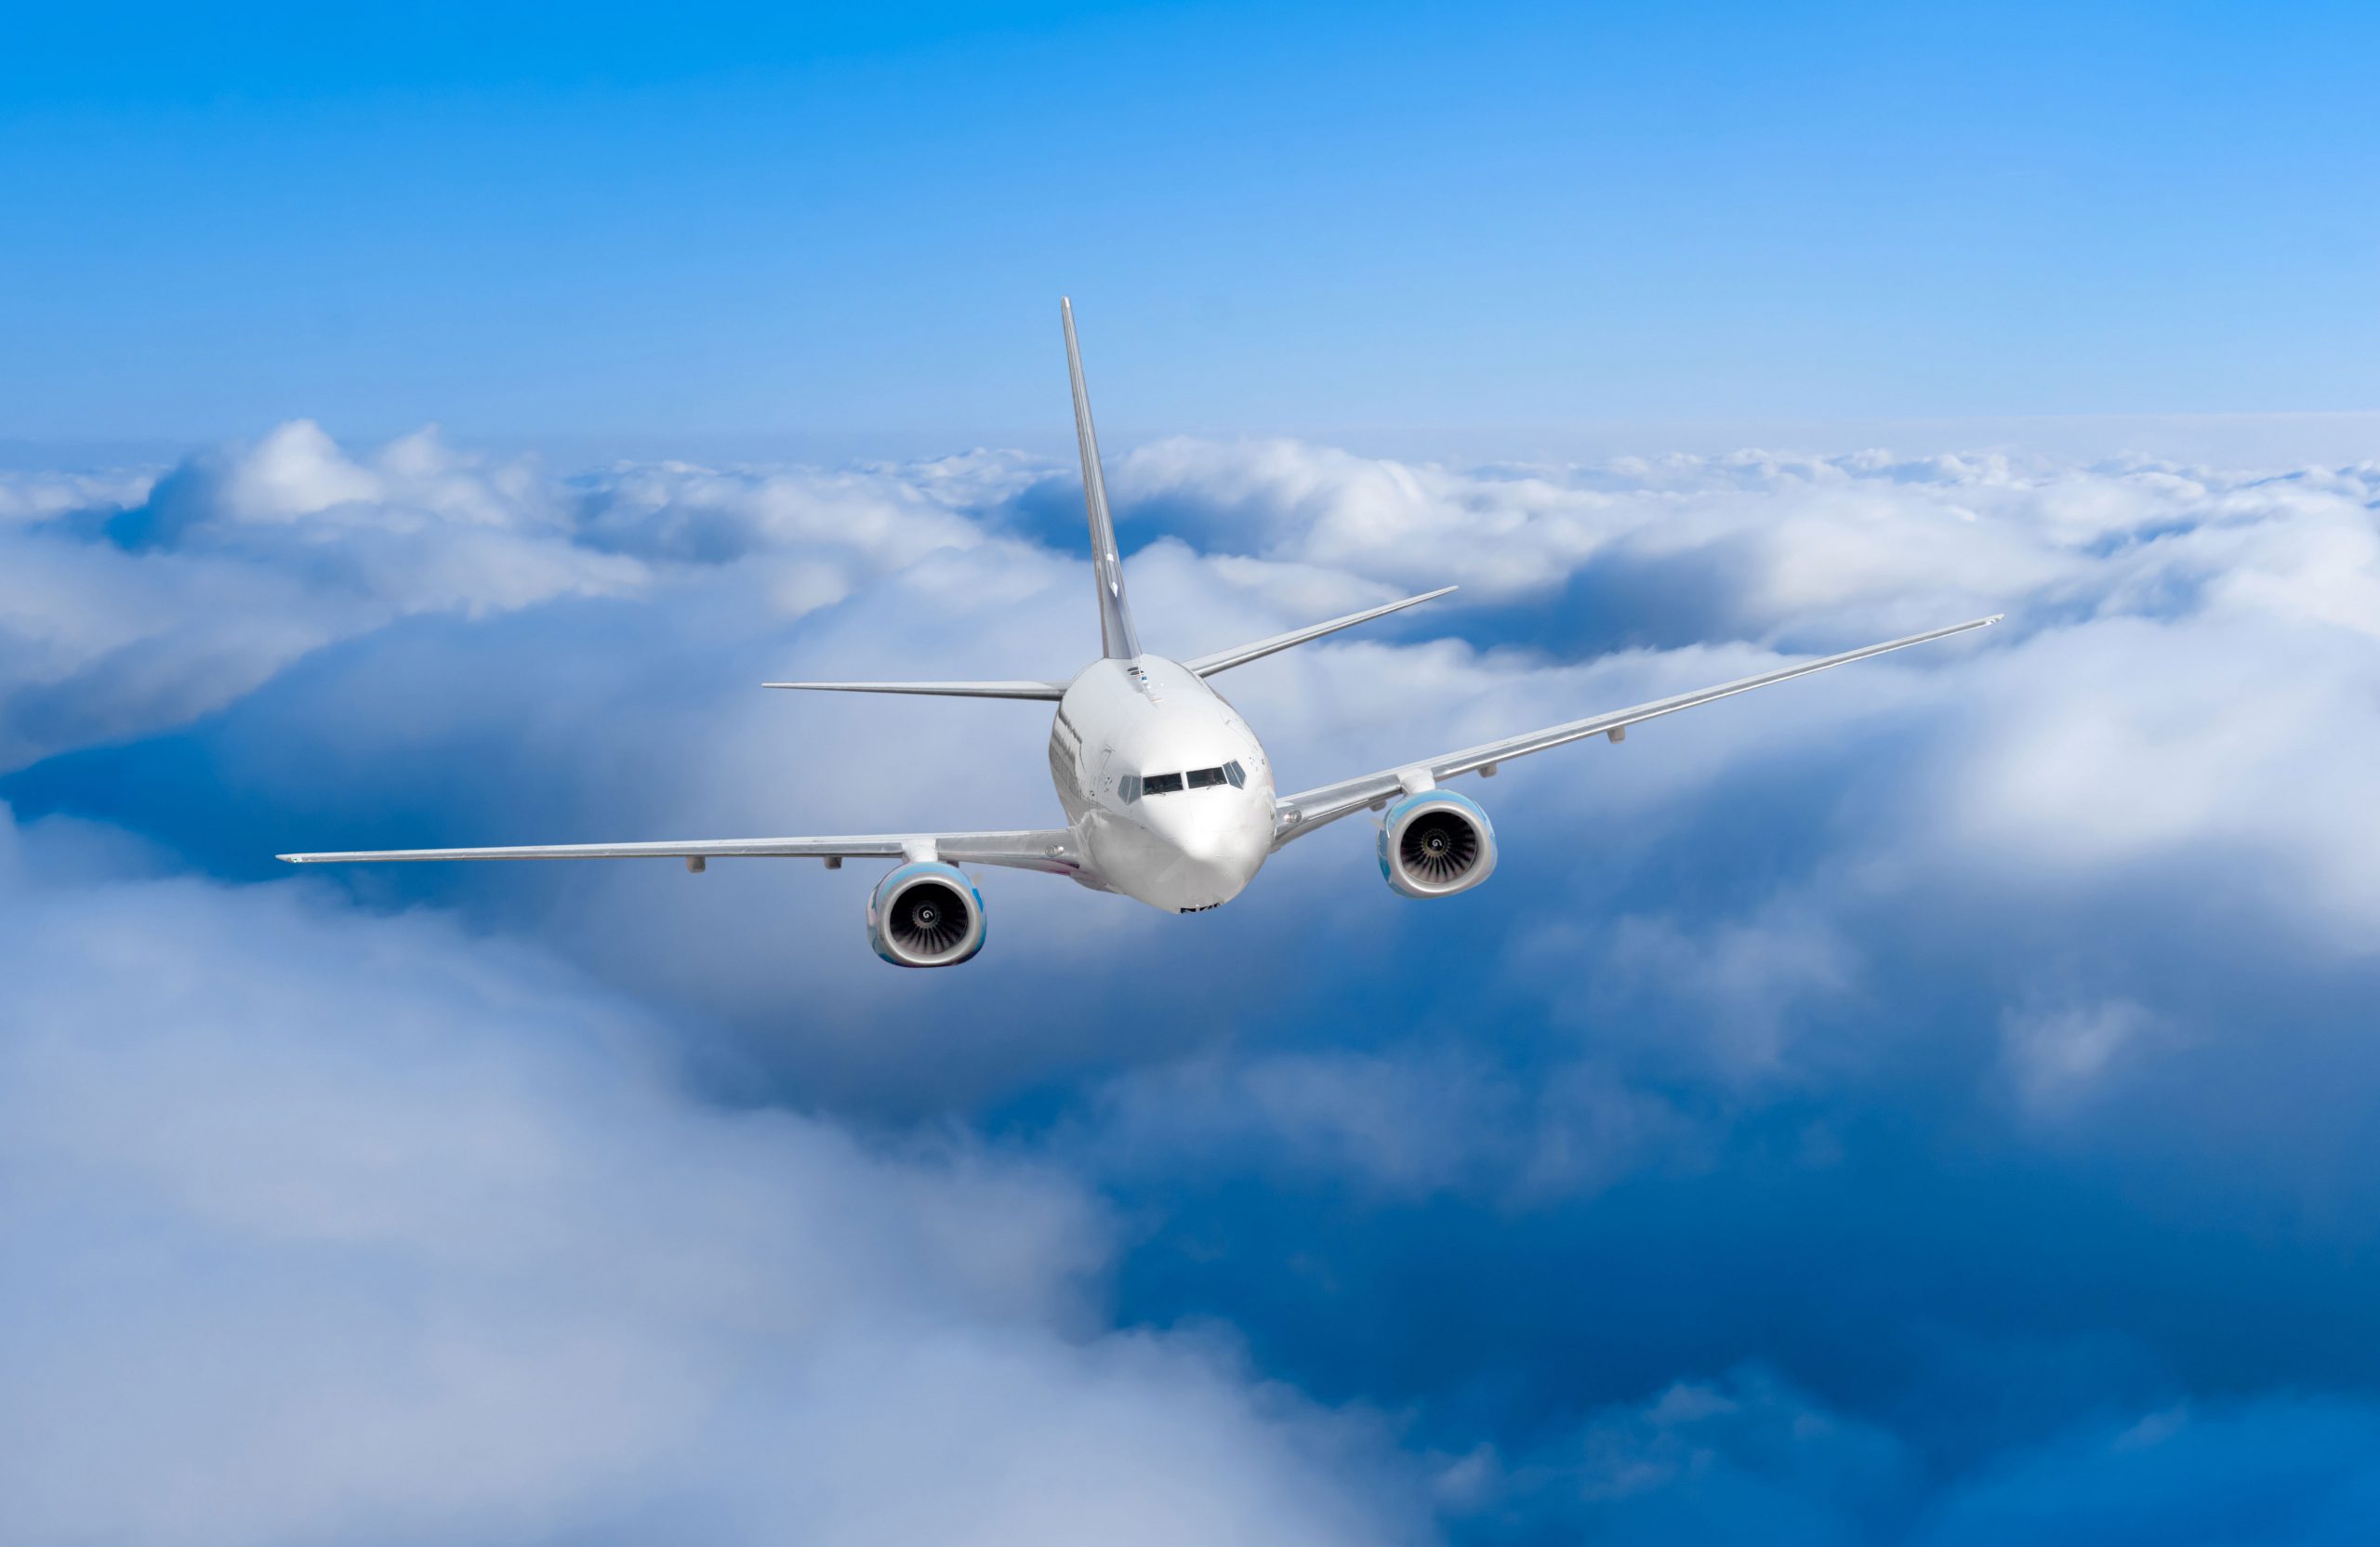 Aviation is at the forefront of the digital wave